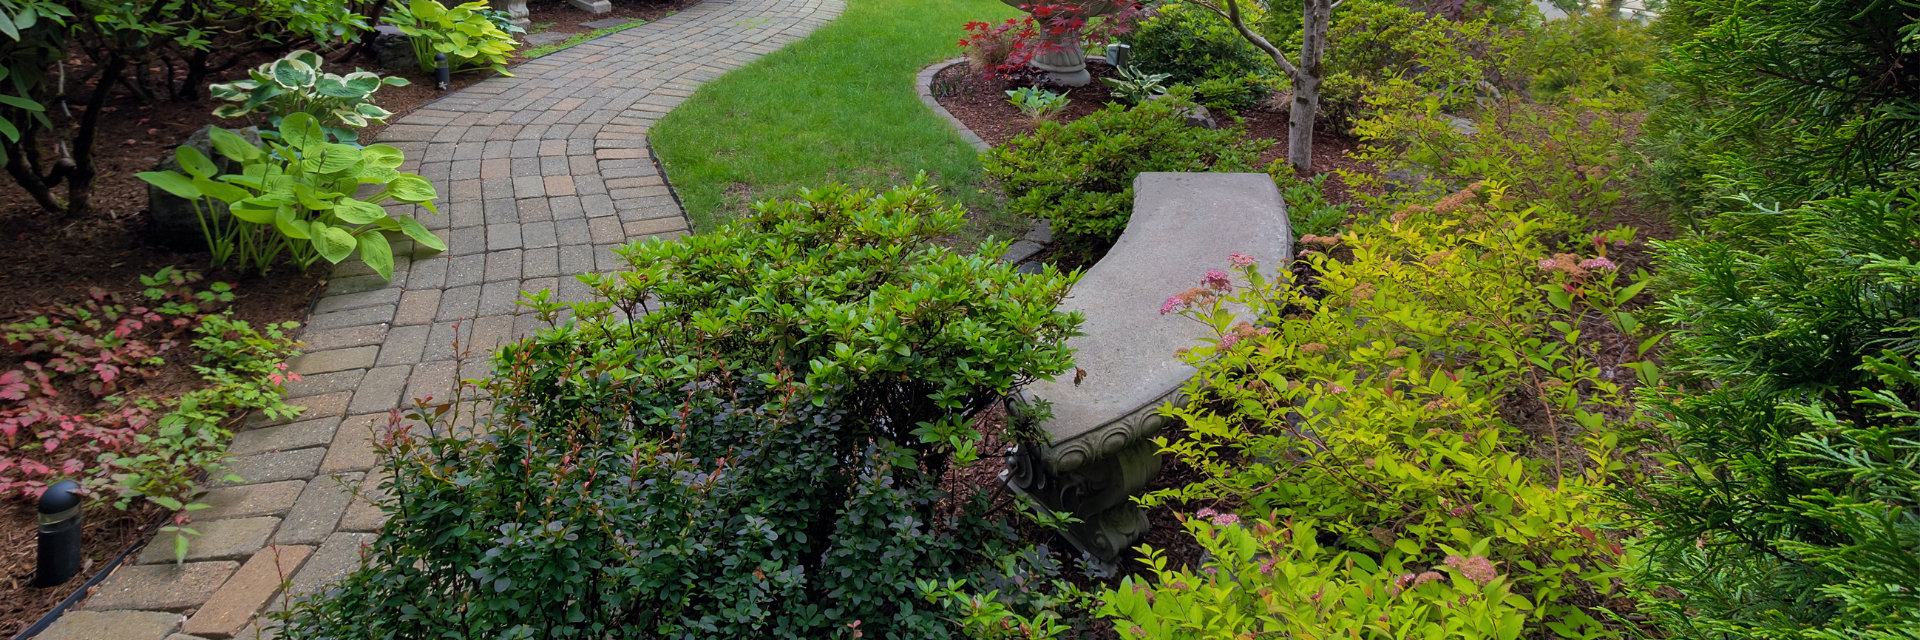 How to Maximize Your Landscape Design This Spring Tyrone, GA